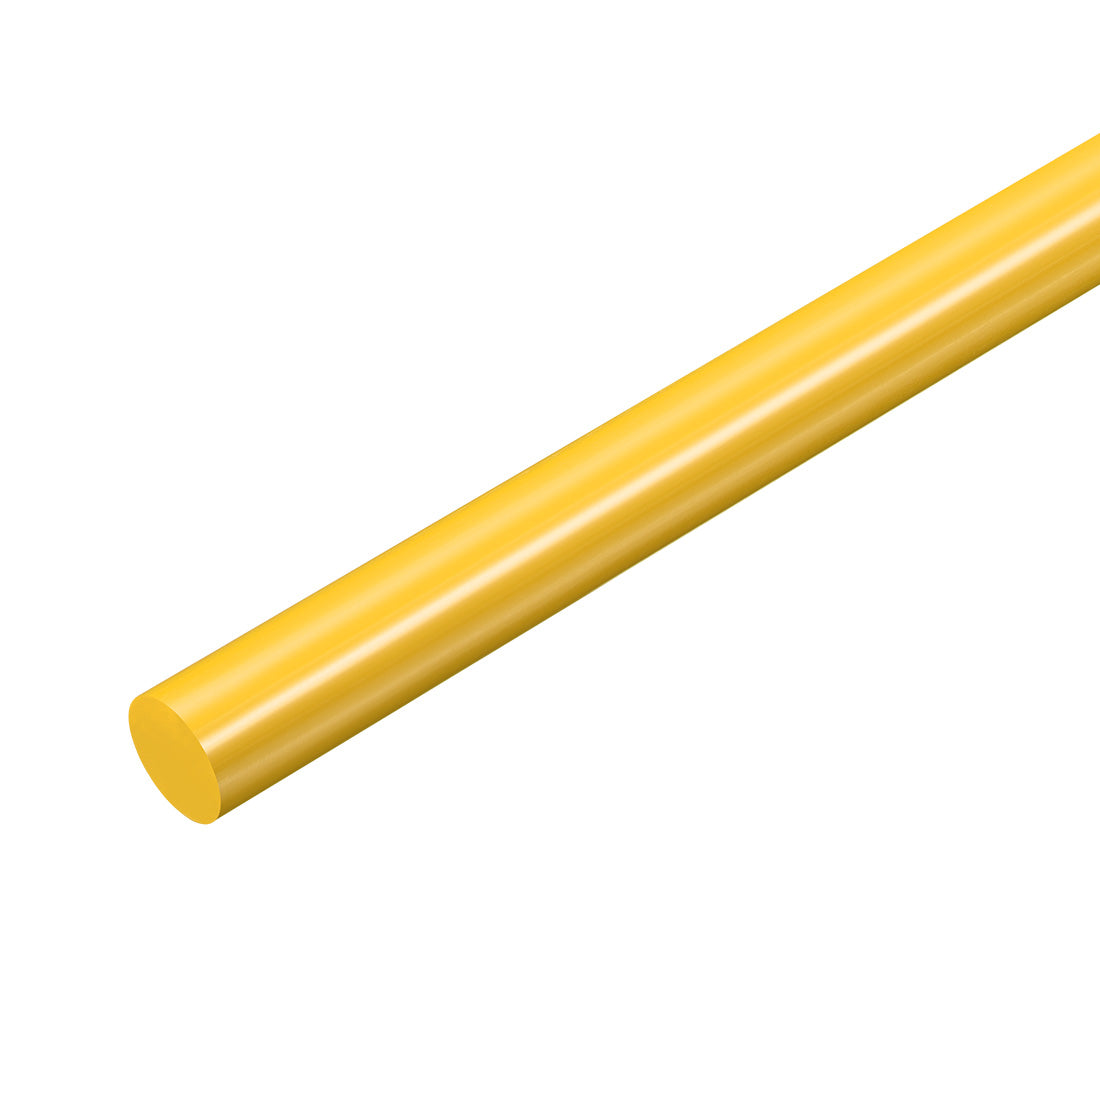 uxcell Uxcell Plastic Round Rod,10mm Dia 50cm Yellow Engineering Plastic Round Bar